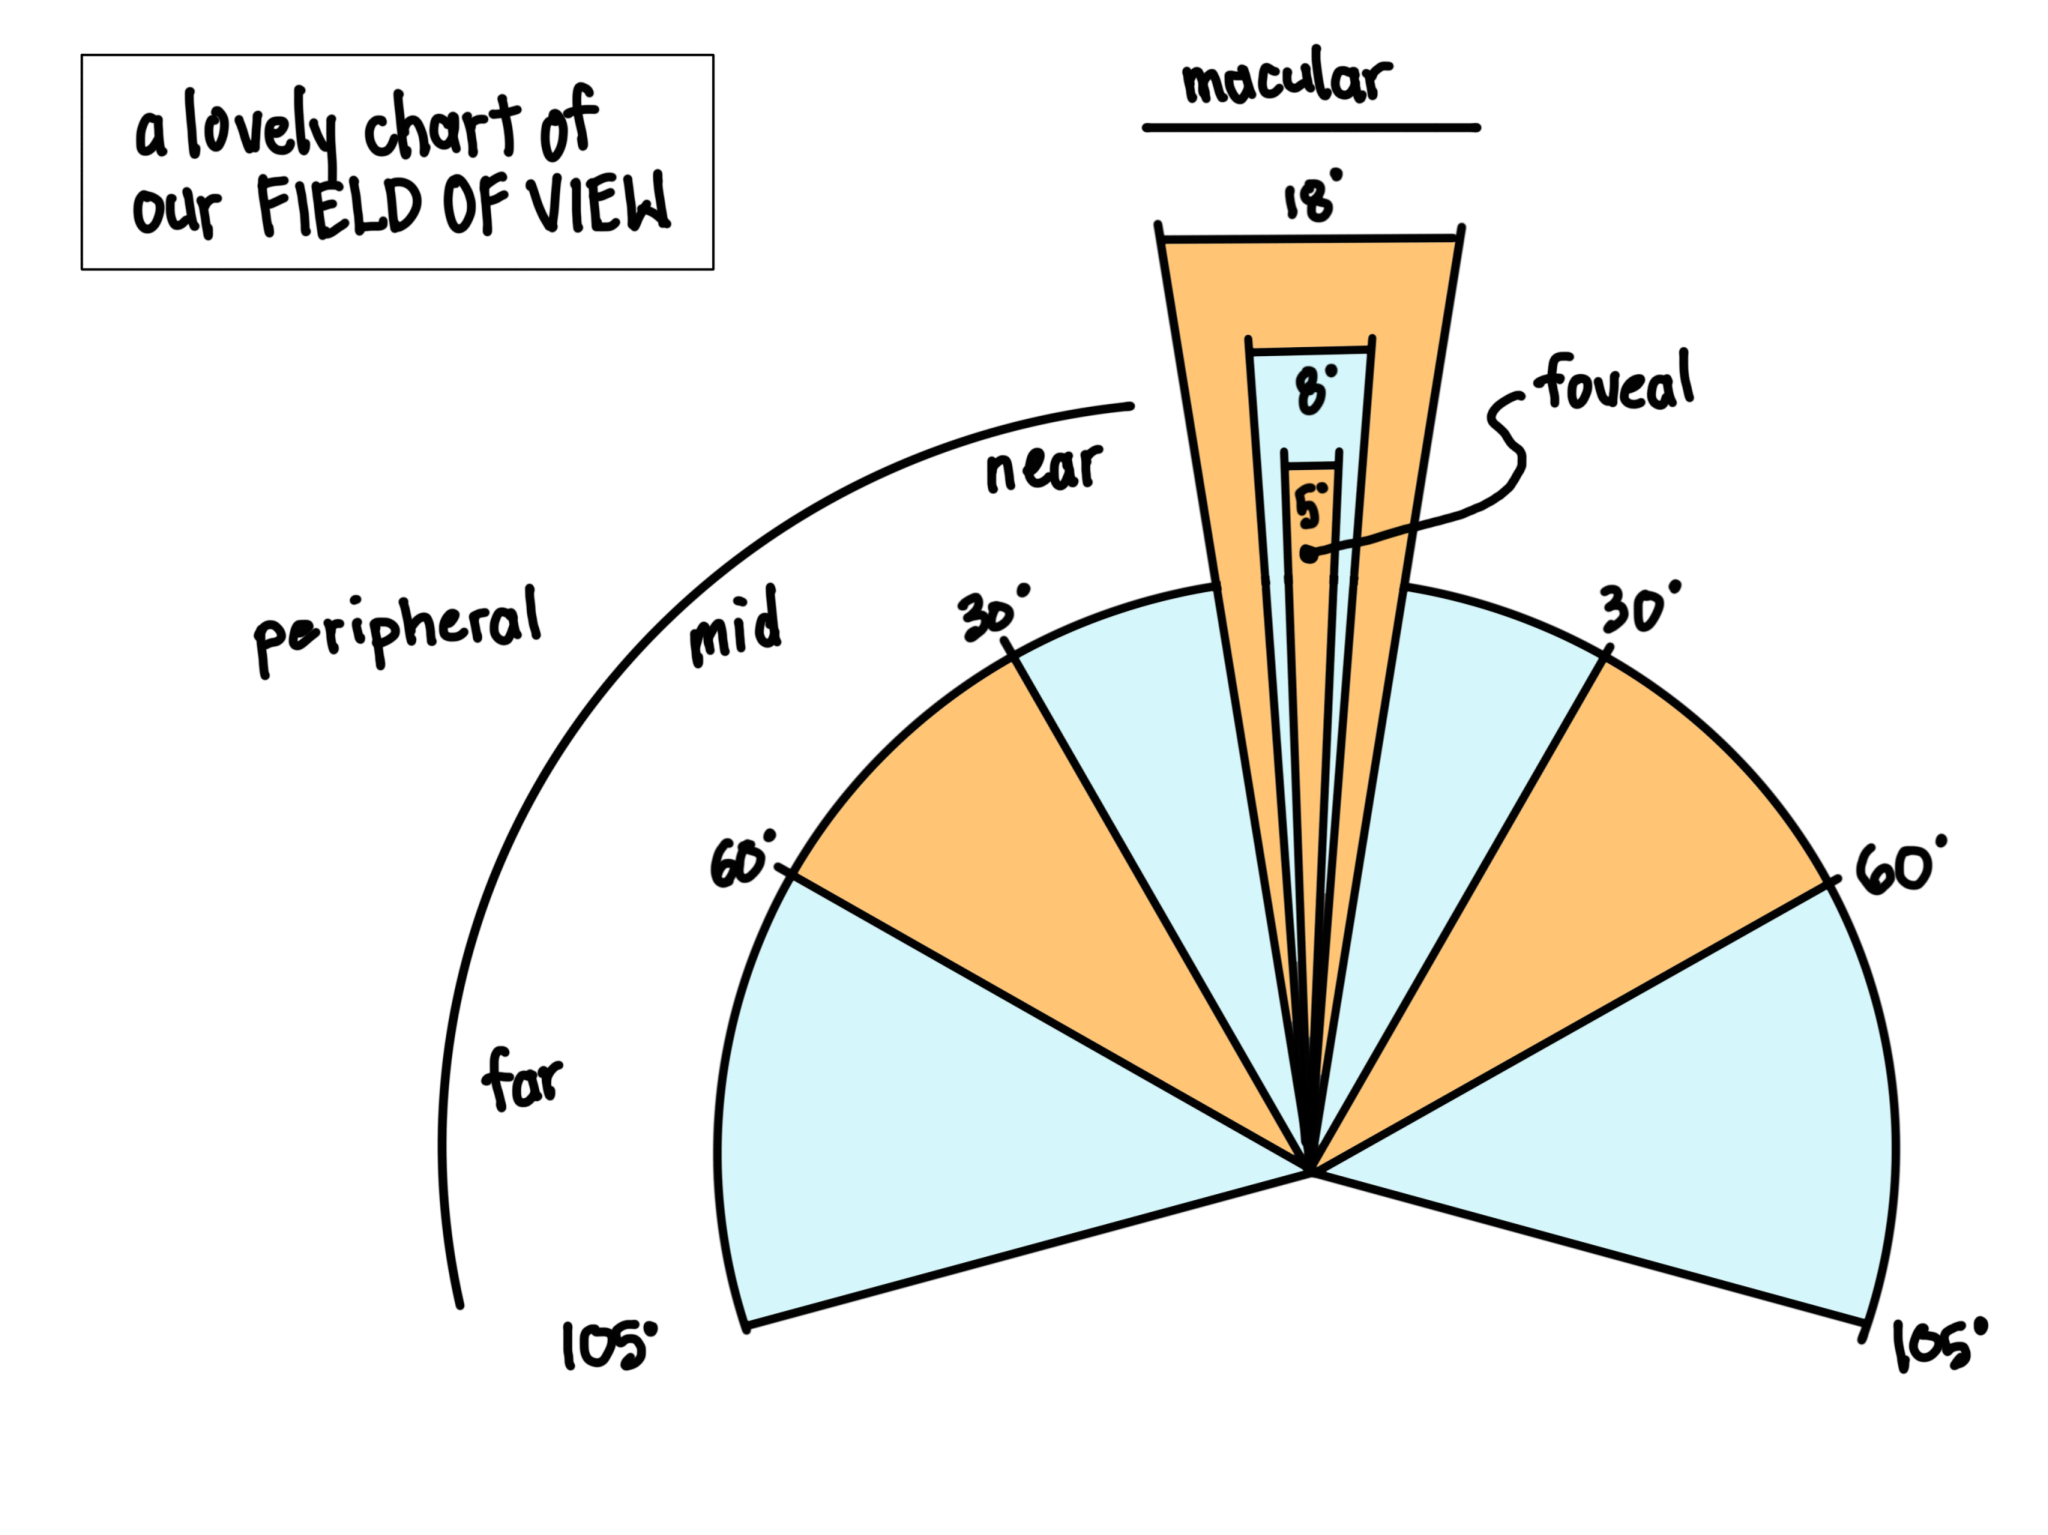 A diagram of a human's field of view, both peripheral and macular